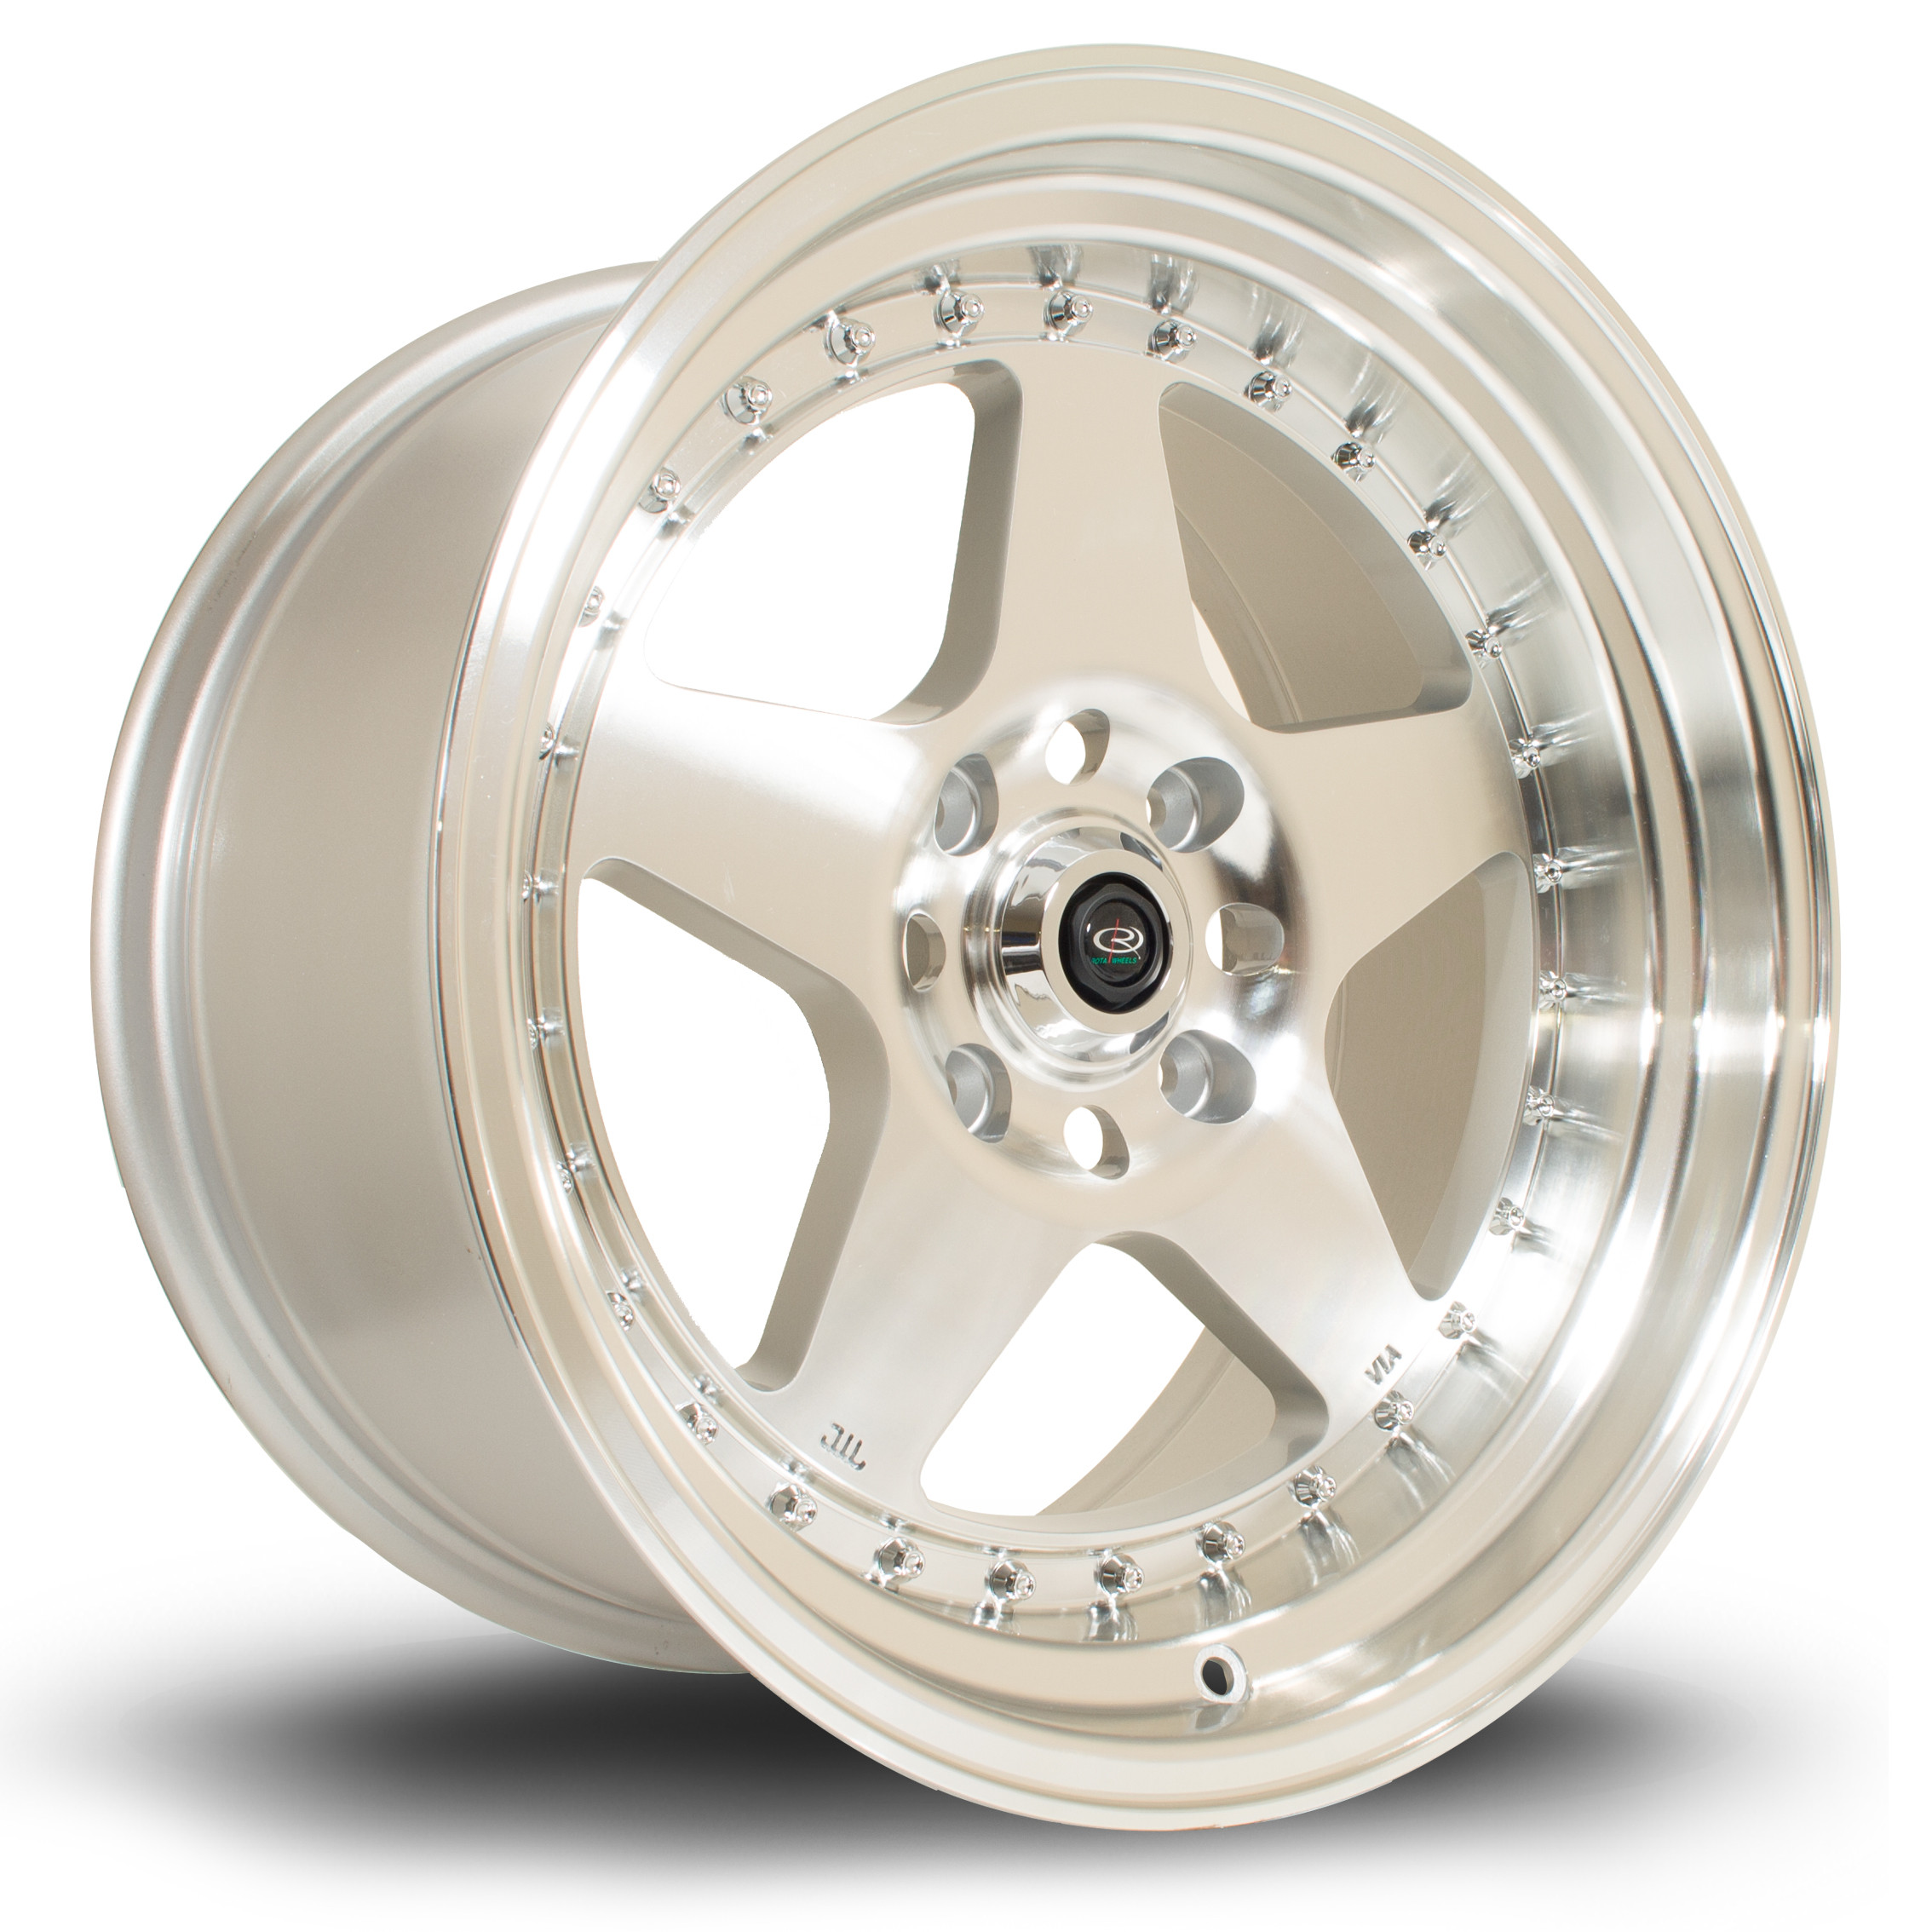 Kyusha 17x9 4x114 ET12 Silver with Polished Face